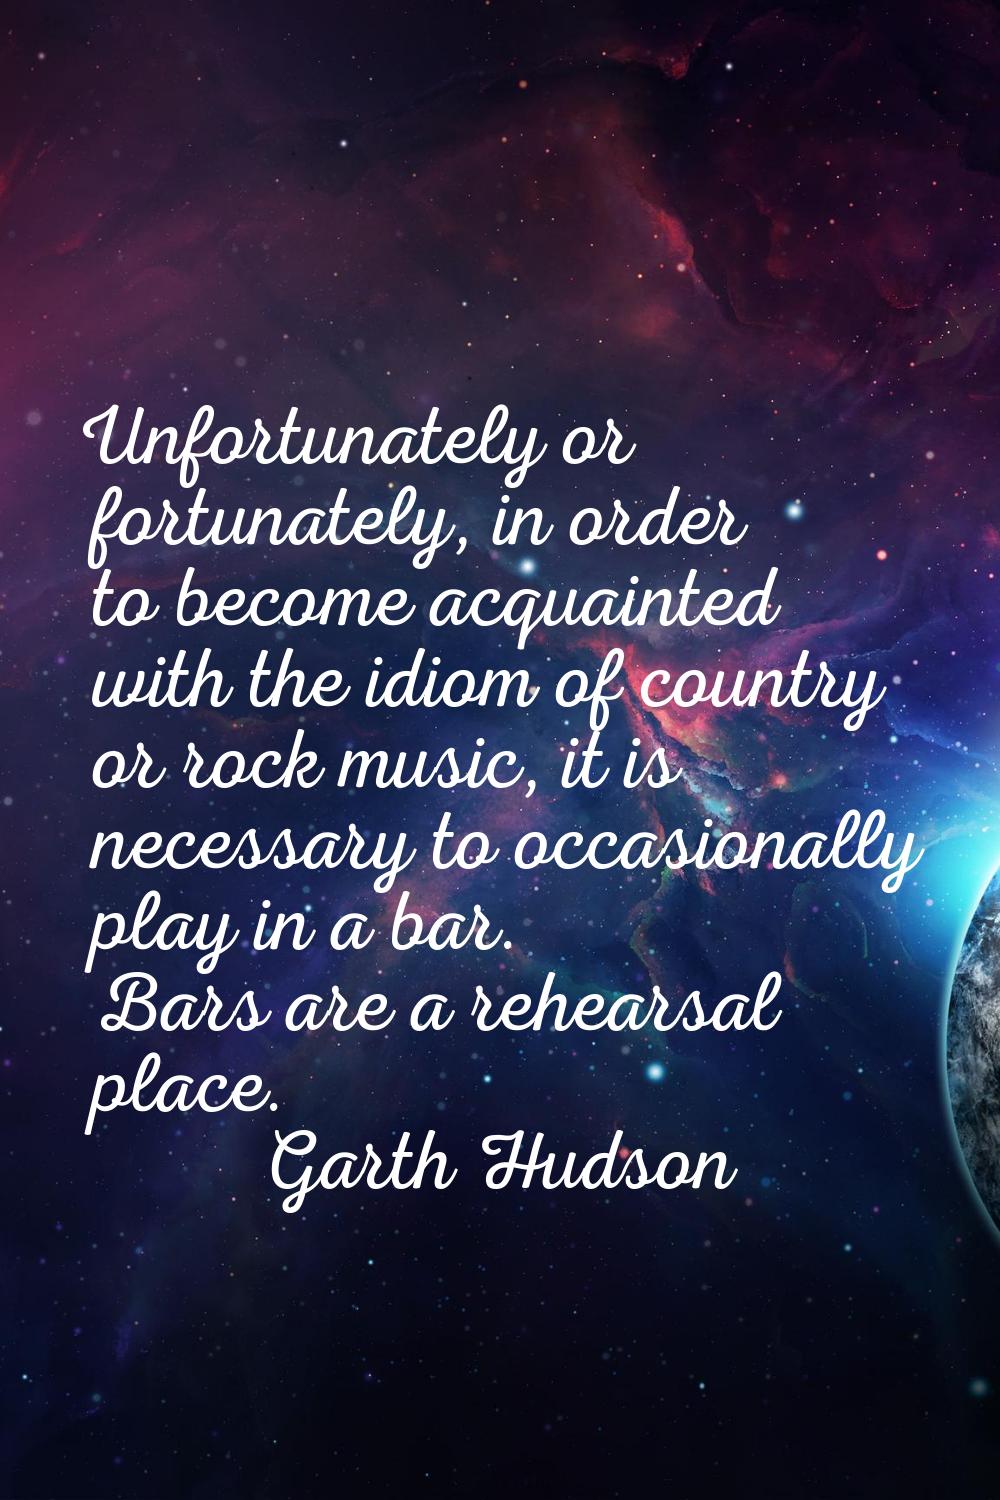 Unfortunately or fortunately, in order to become acquainted with the idiom of country or rock music